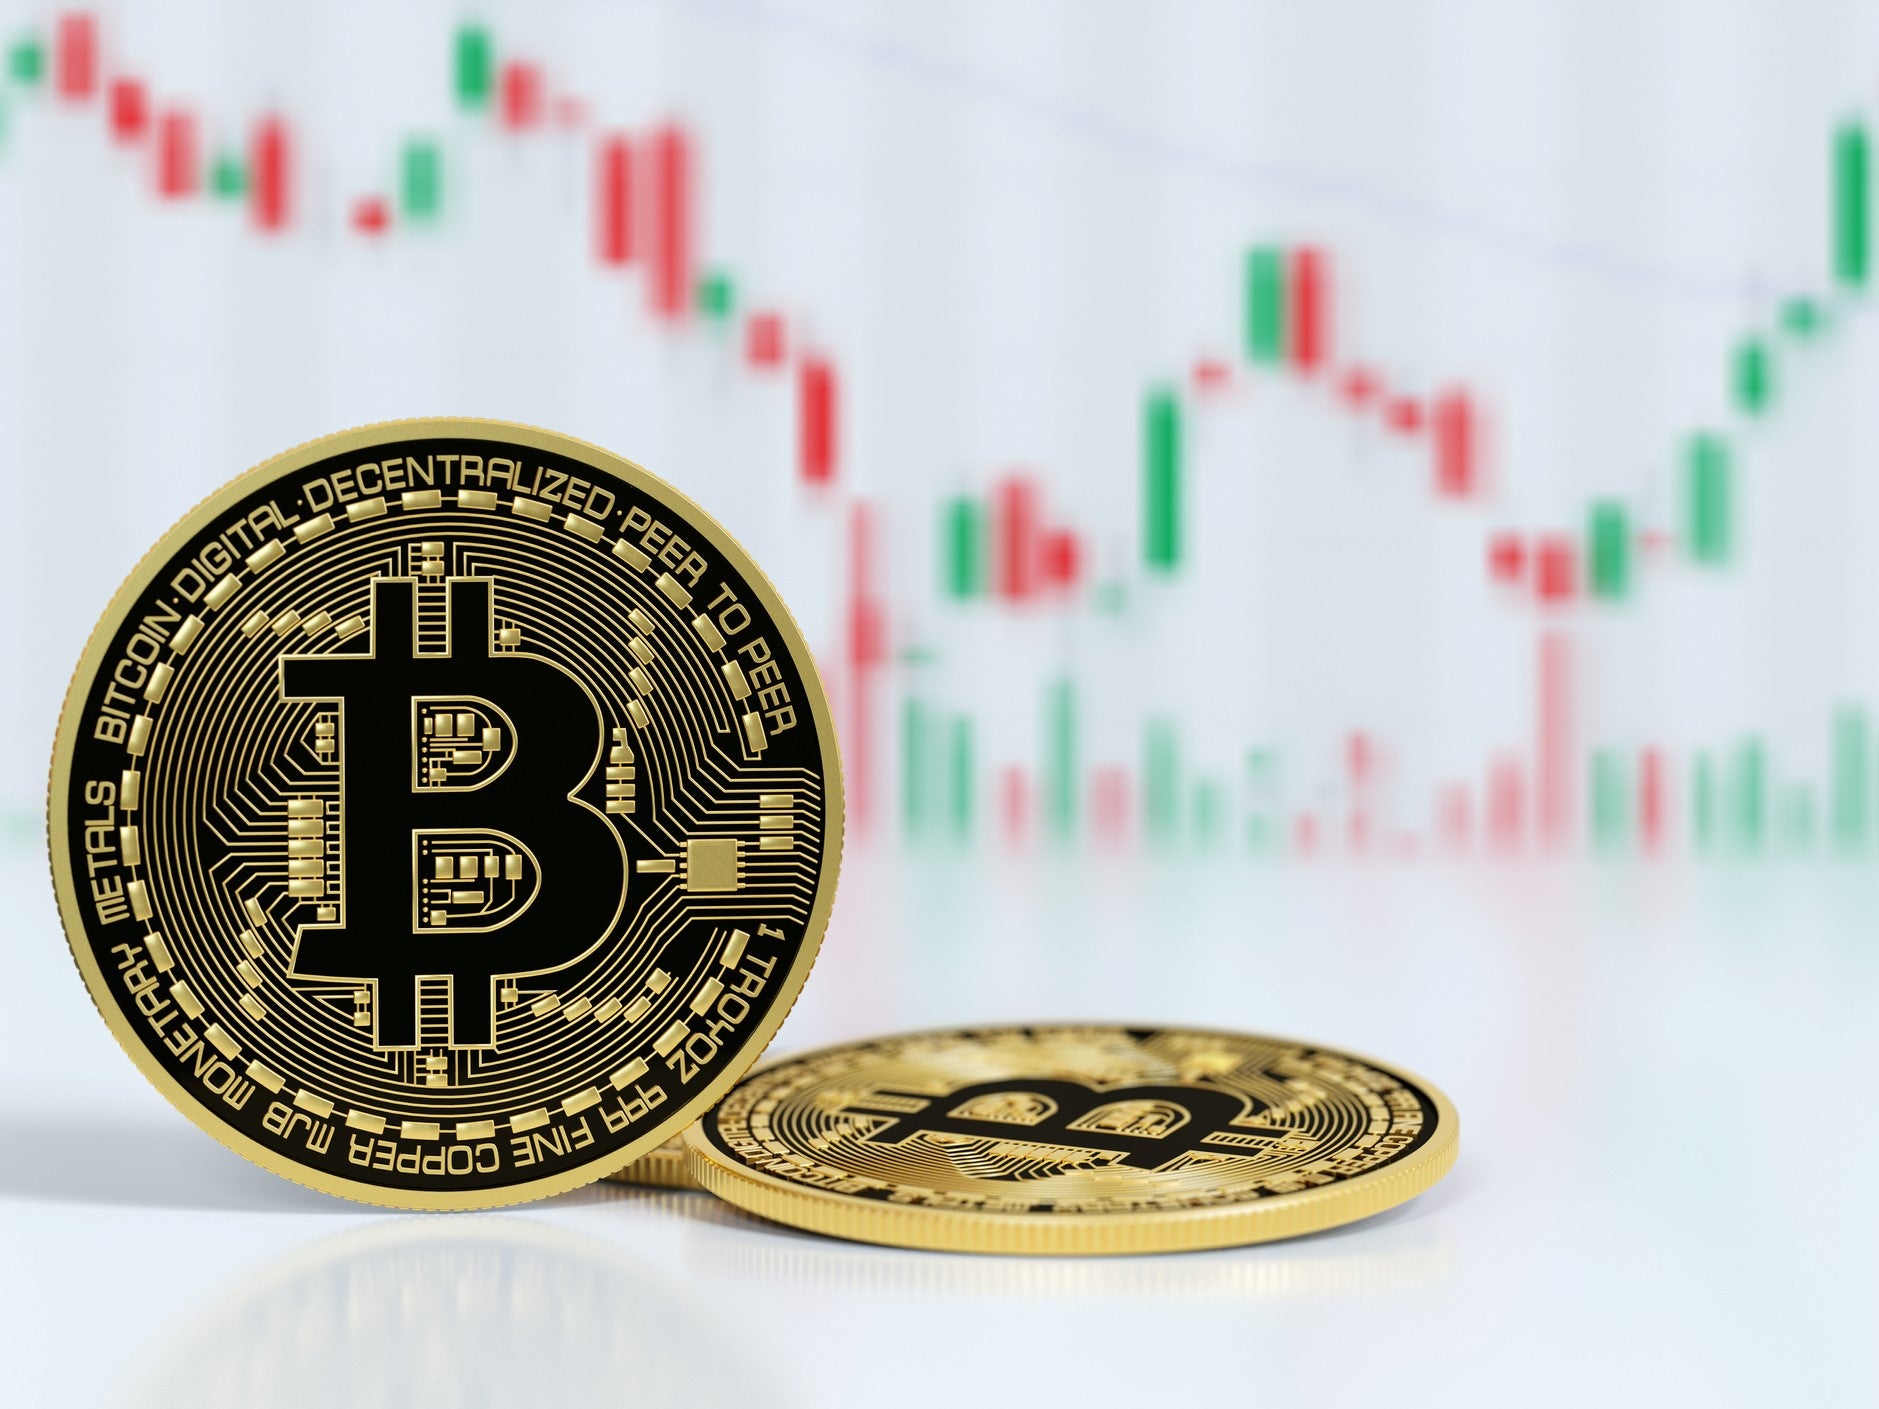 Bitcoin is experiencing a strong price recovery at the start of October 2021 amid positive news in the crypto space